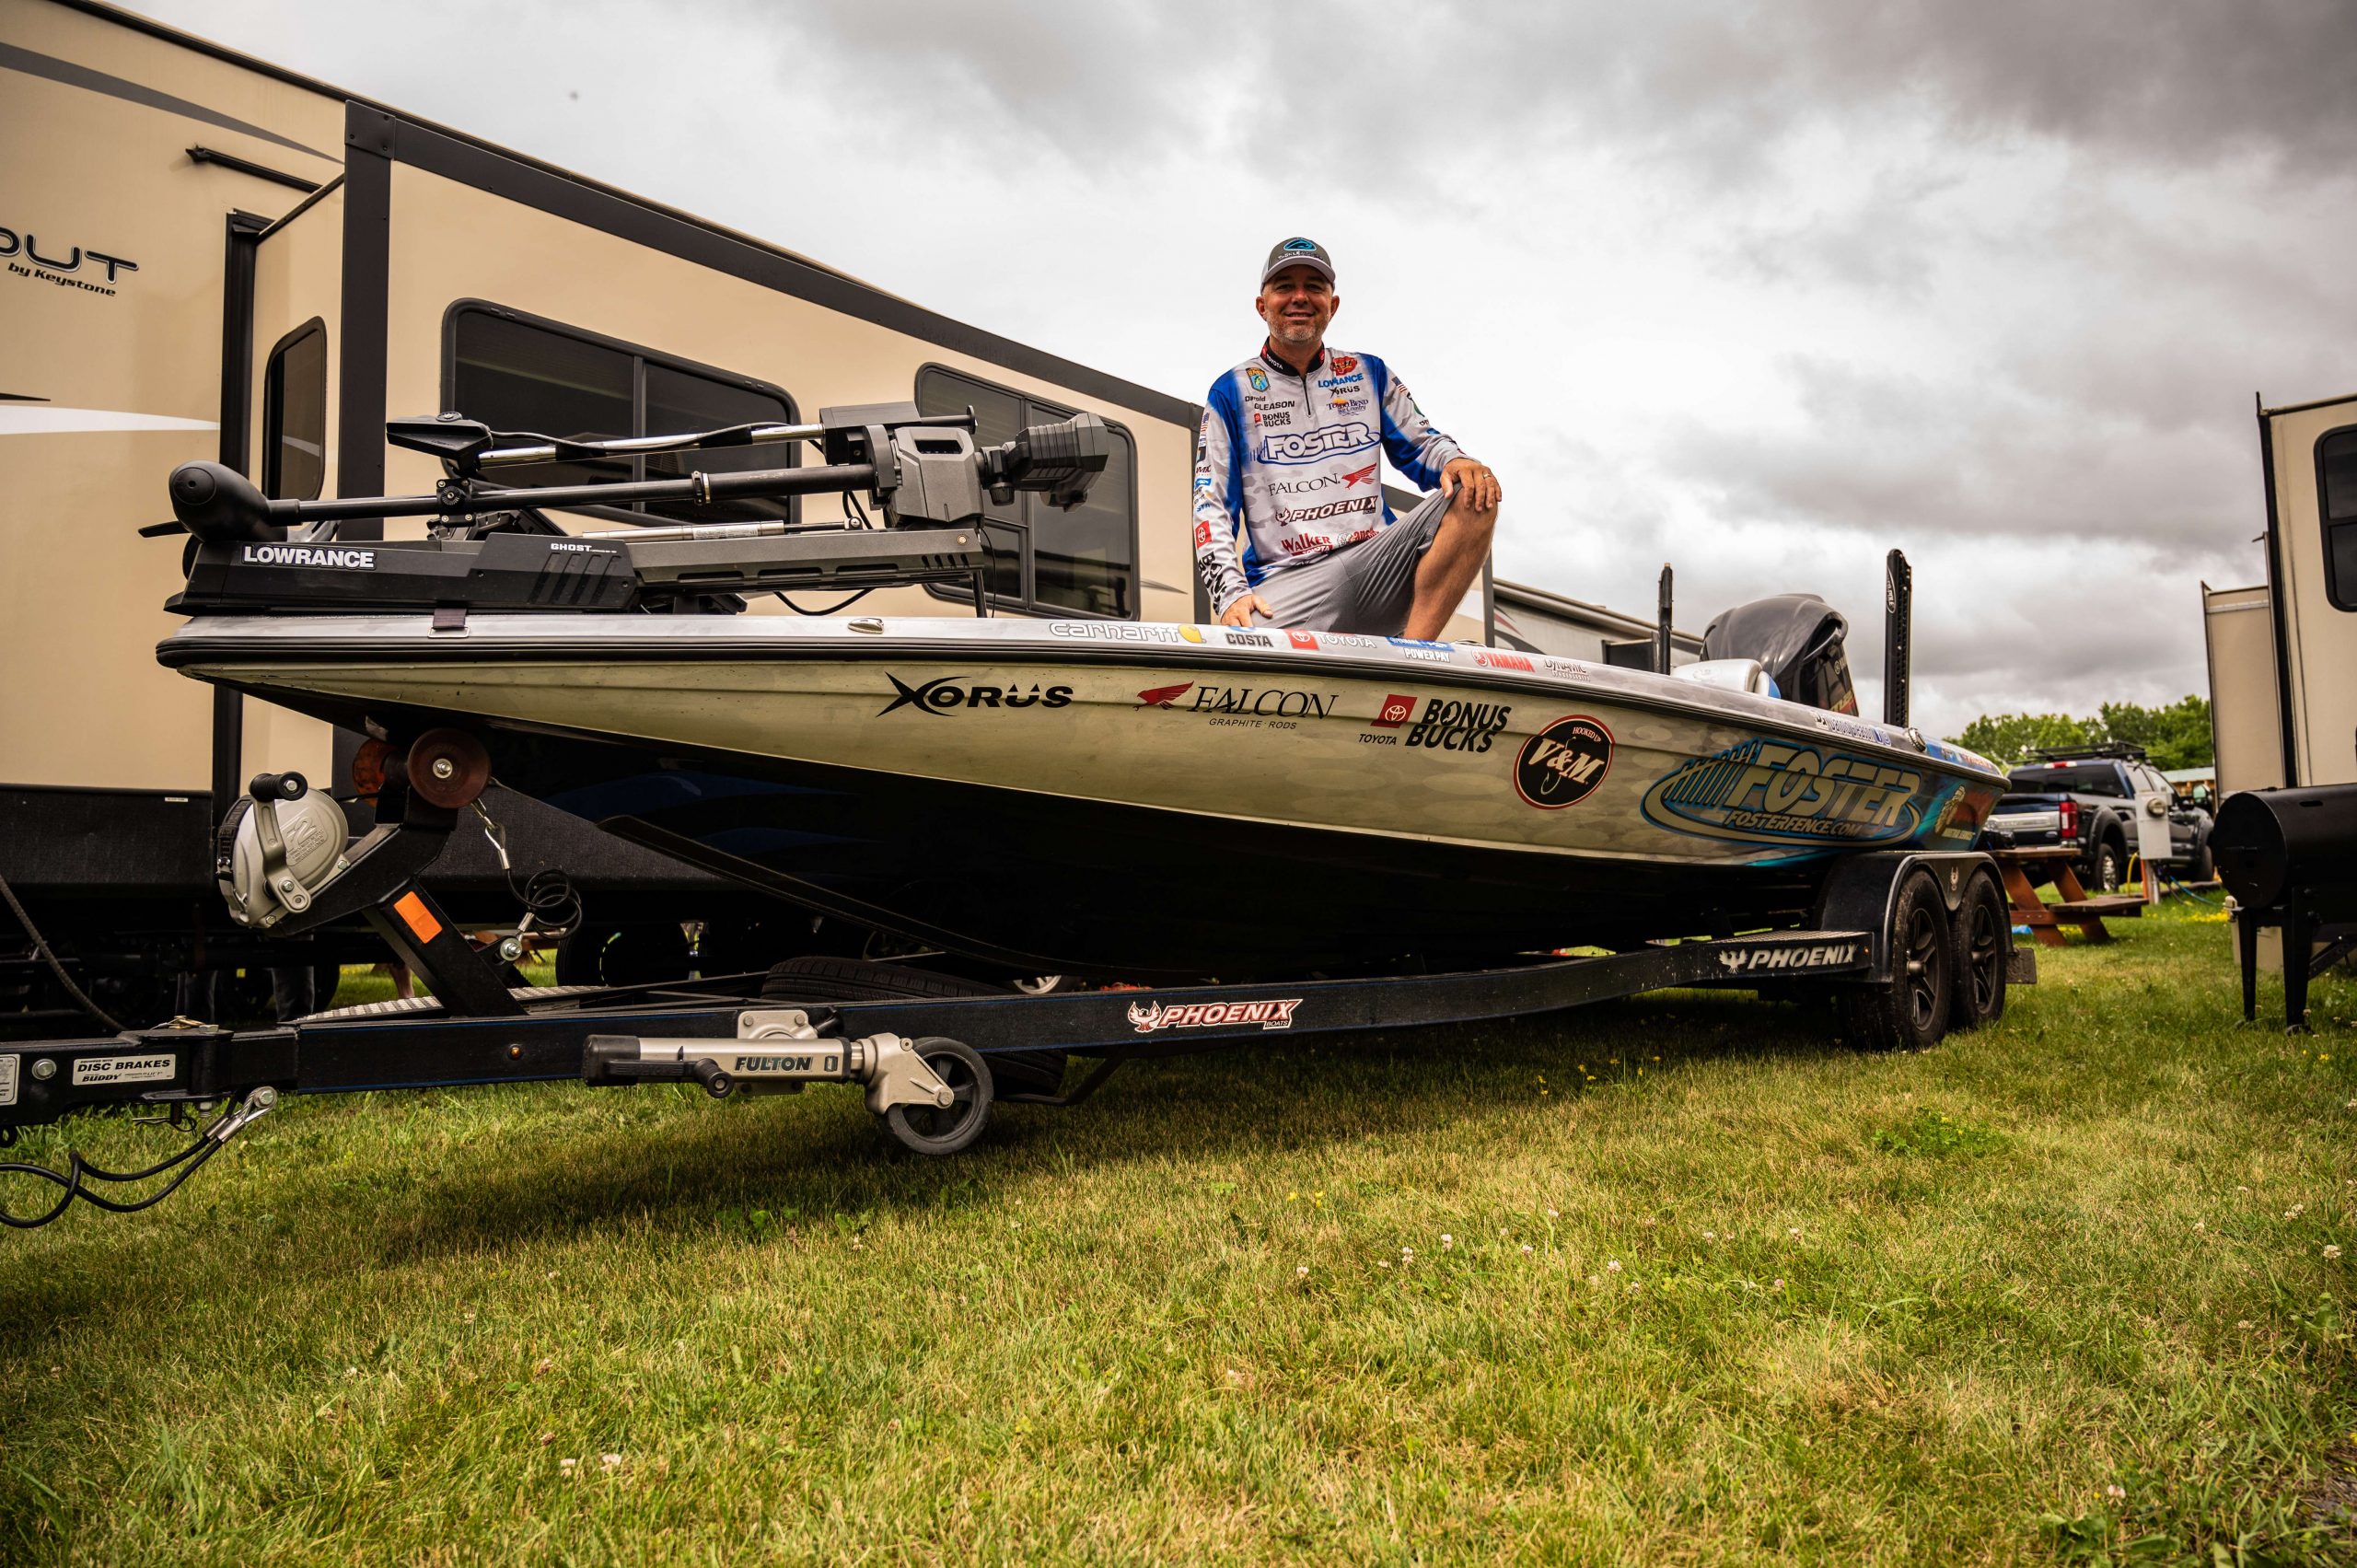 With the group of rods listed, any angler could have success using these techniques.
<br><br>
Thanks for showing us around your boat, Darold!